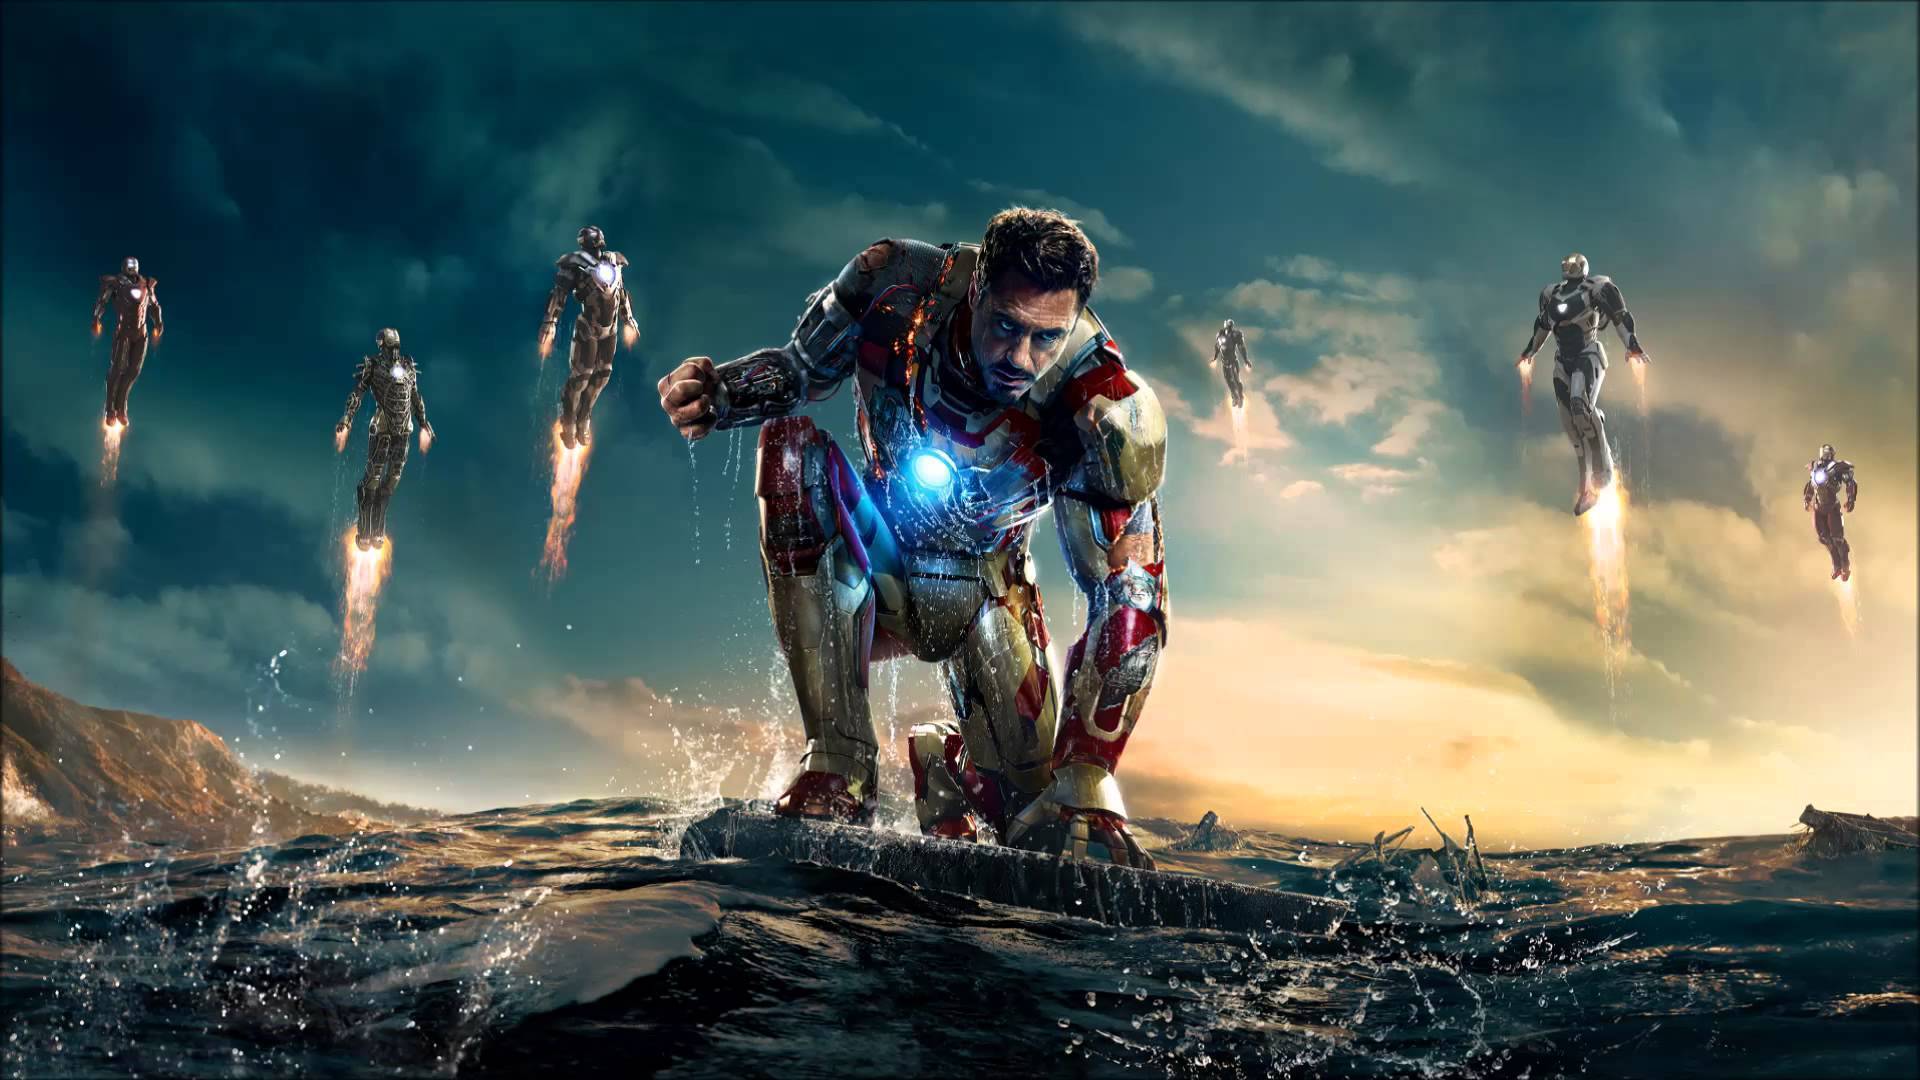 Slideshow: Every Iron Man Armor in the Marvel Cinematic Universe